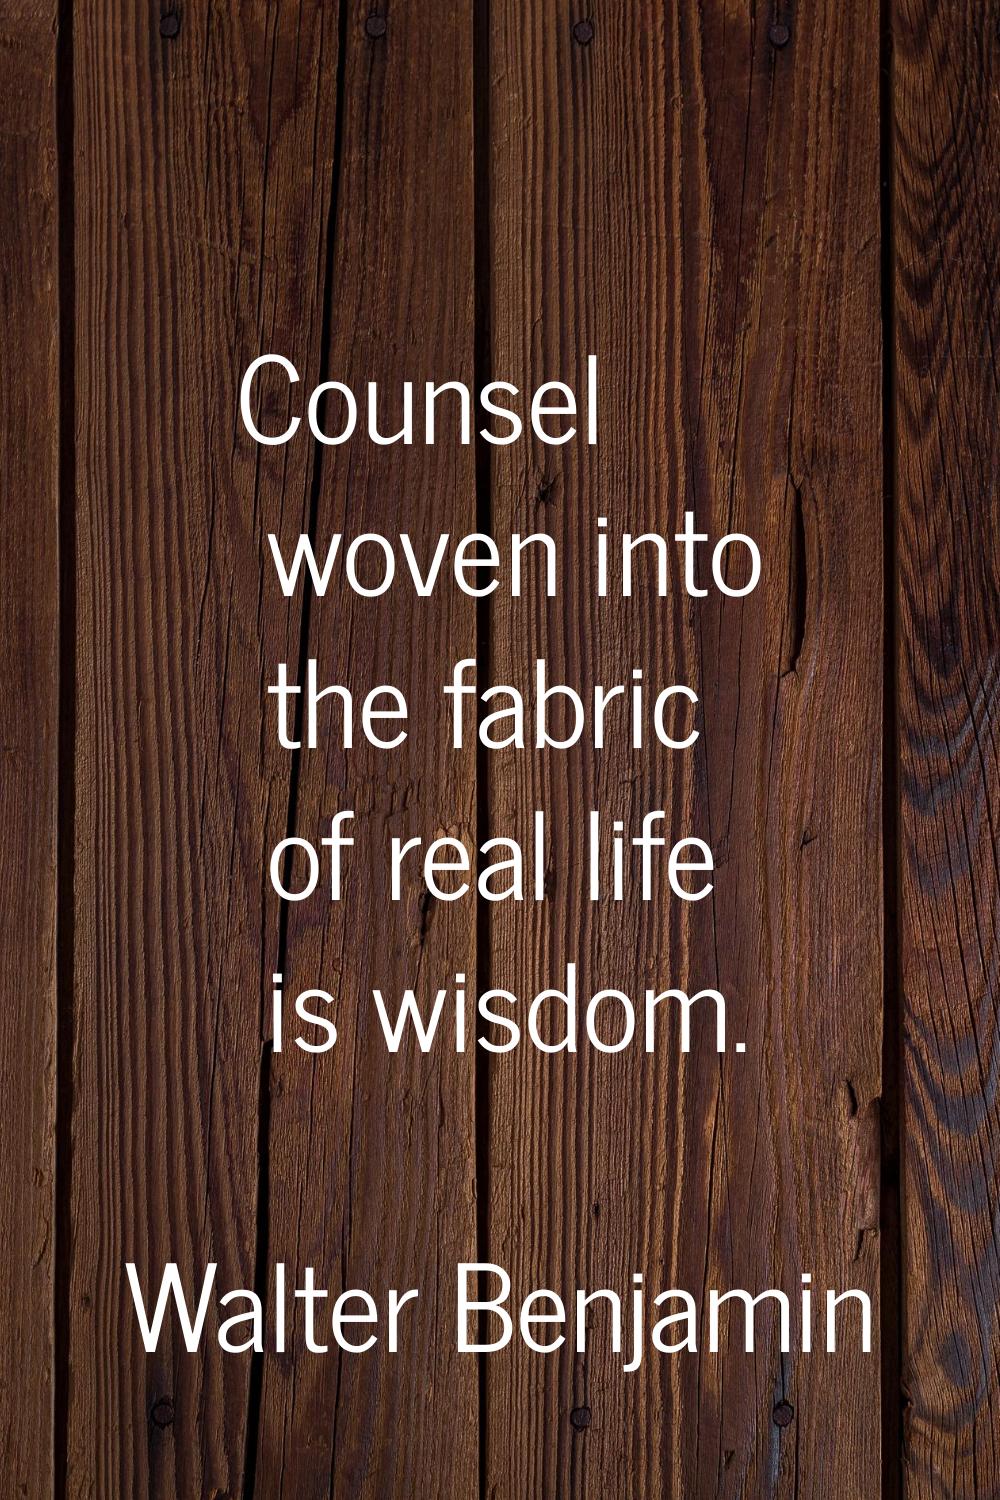 Counsel woven into the fabric of real life is wisdom.